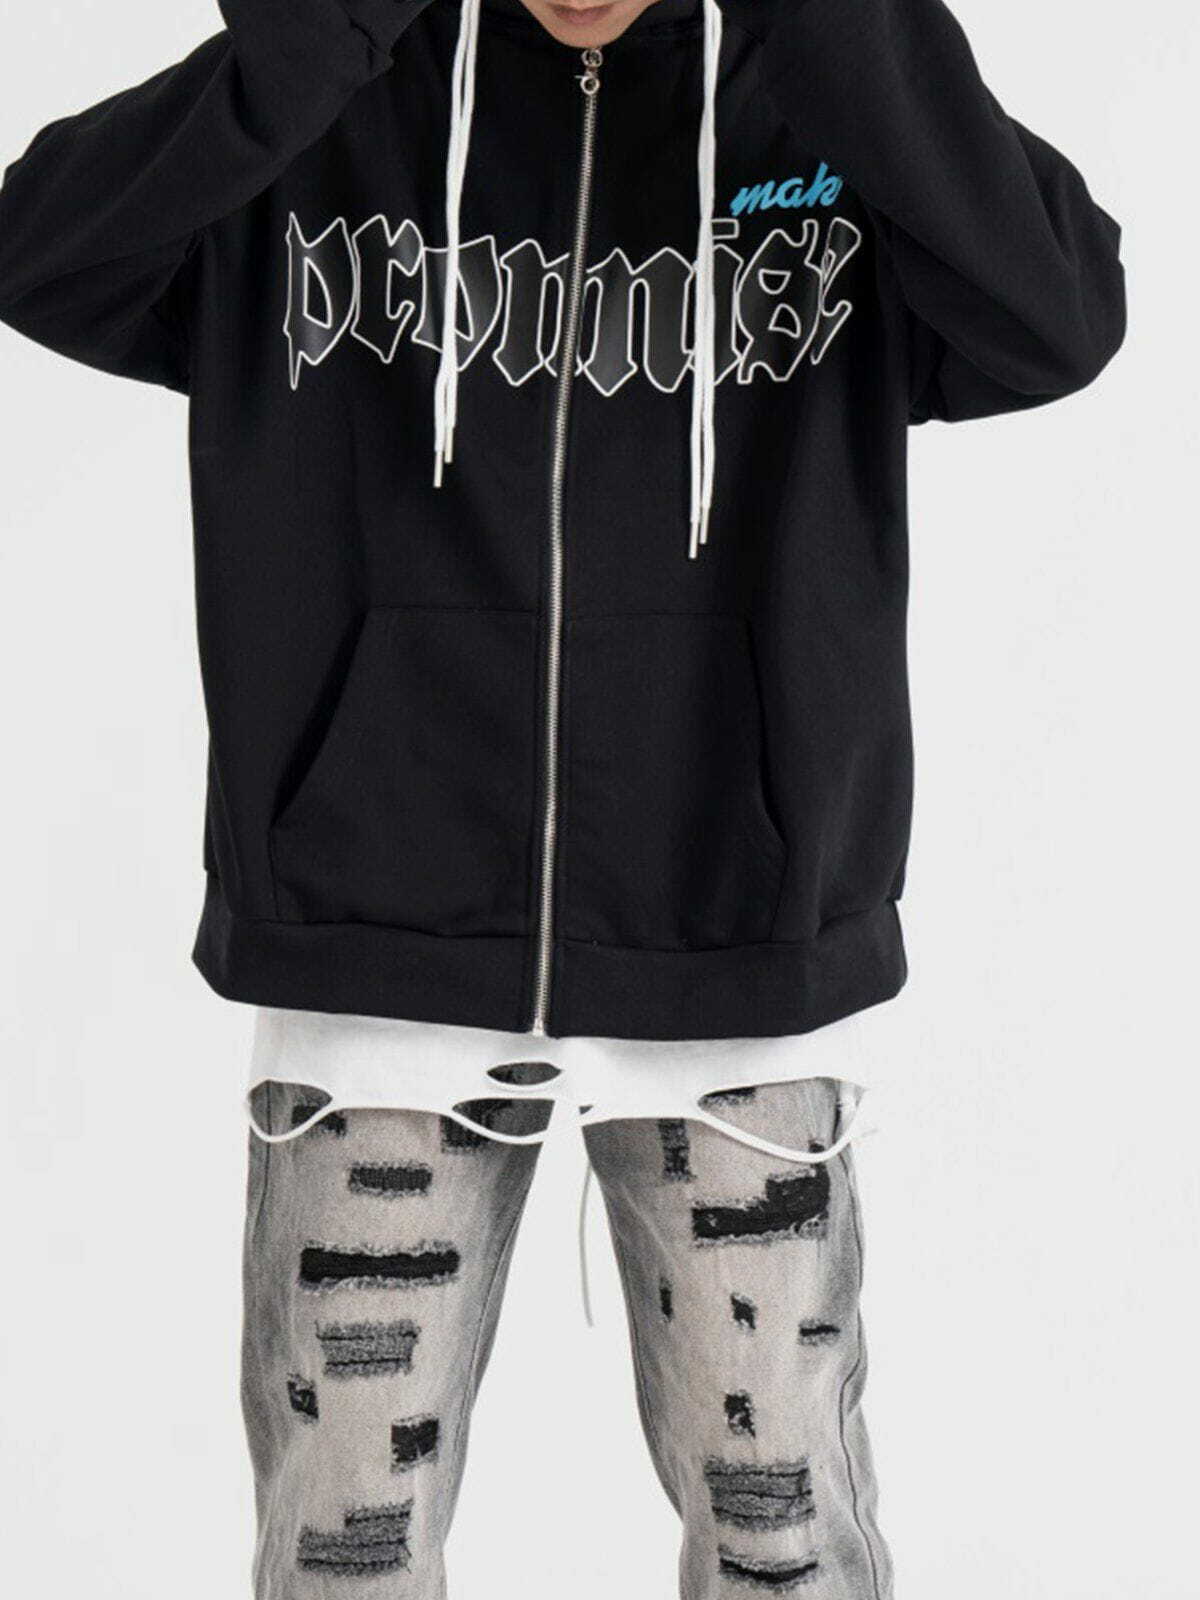 gothic letter number hoodie edgy & youthful streetwear 1283